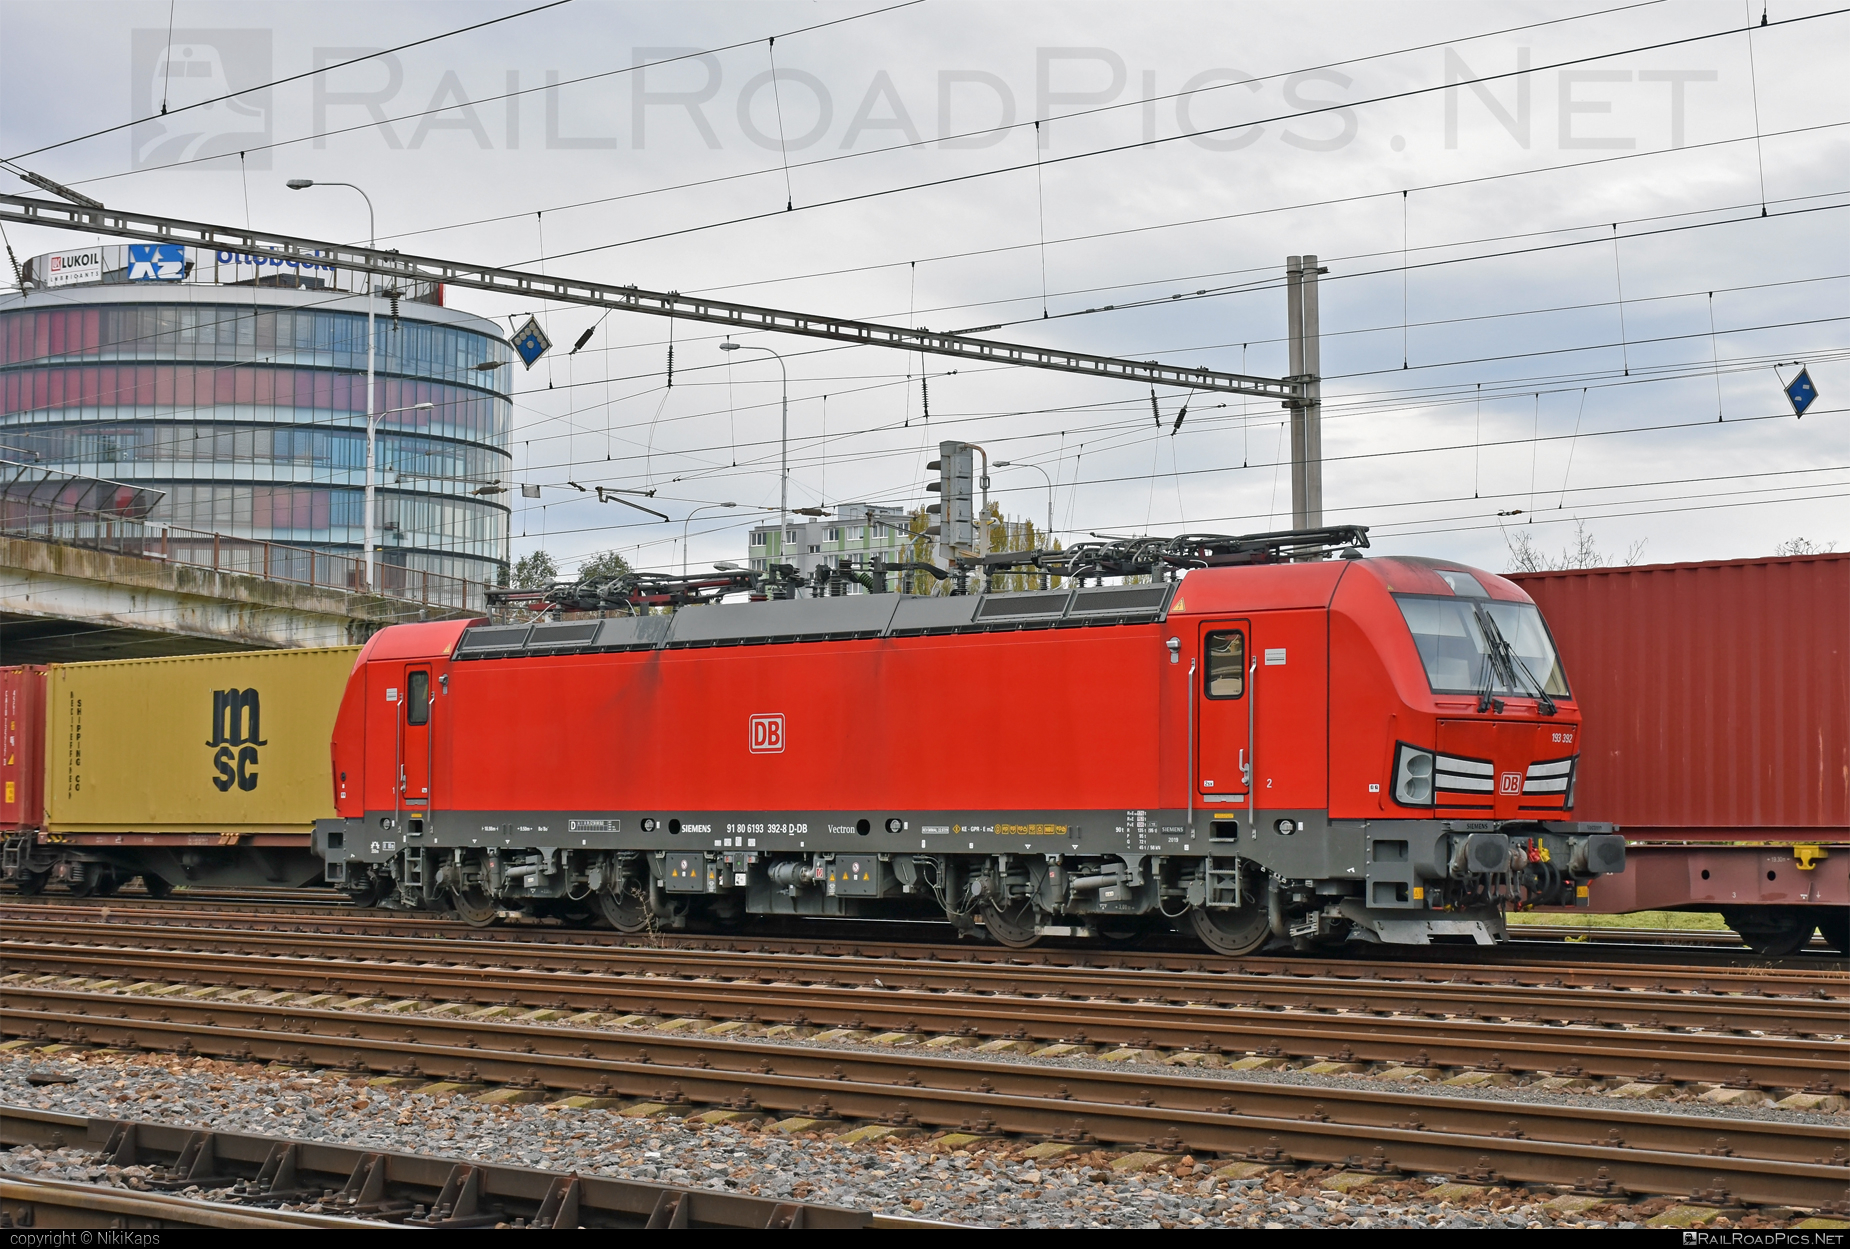 Siemens Vectron MS - 193 392 operated by DB Cargo AG #db #dbcargo #dbcargoag #deutschebahn #siemens #siemensVectron #siemensVectronMS #vectron #vectronMS